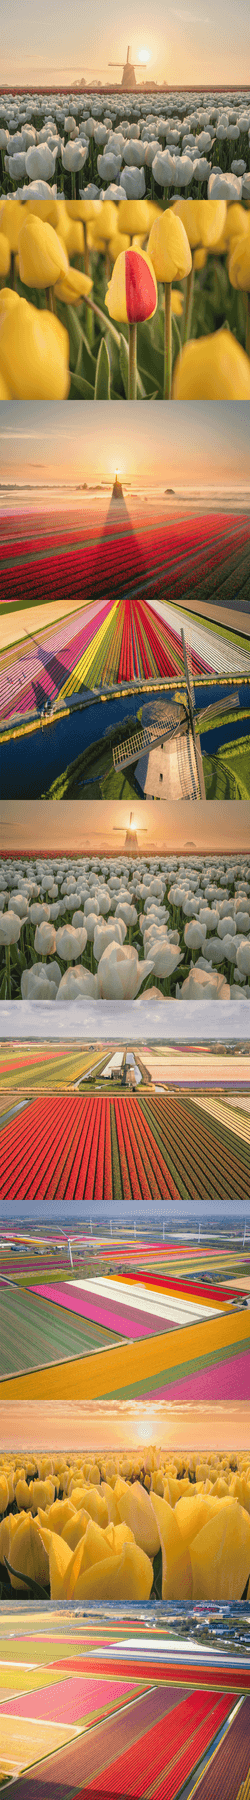 The Tulip collection image